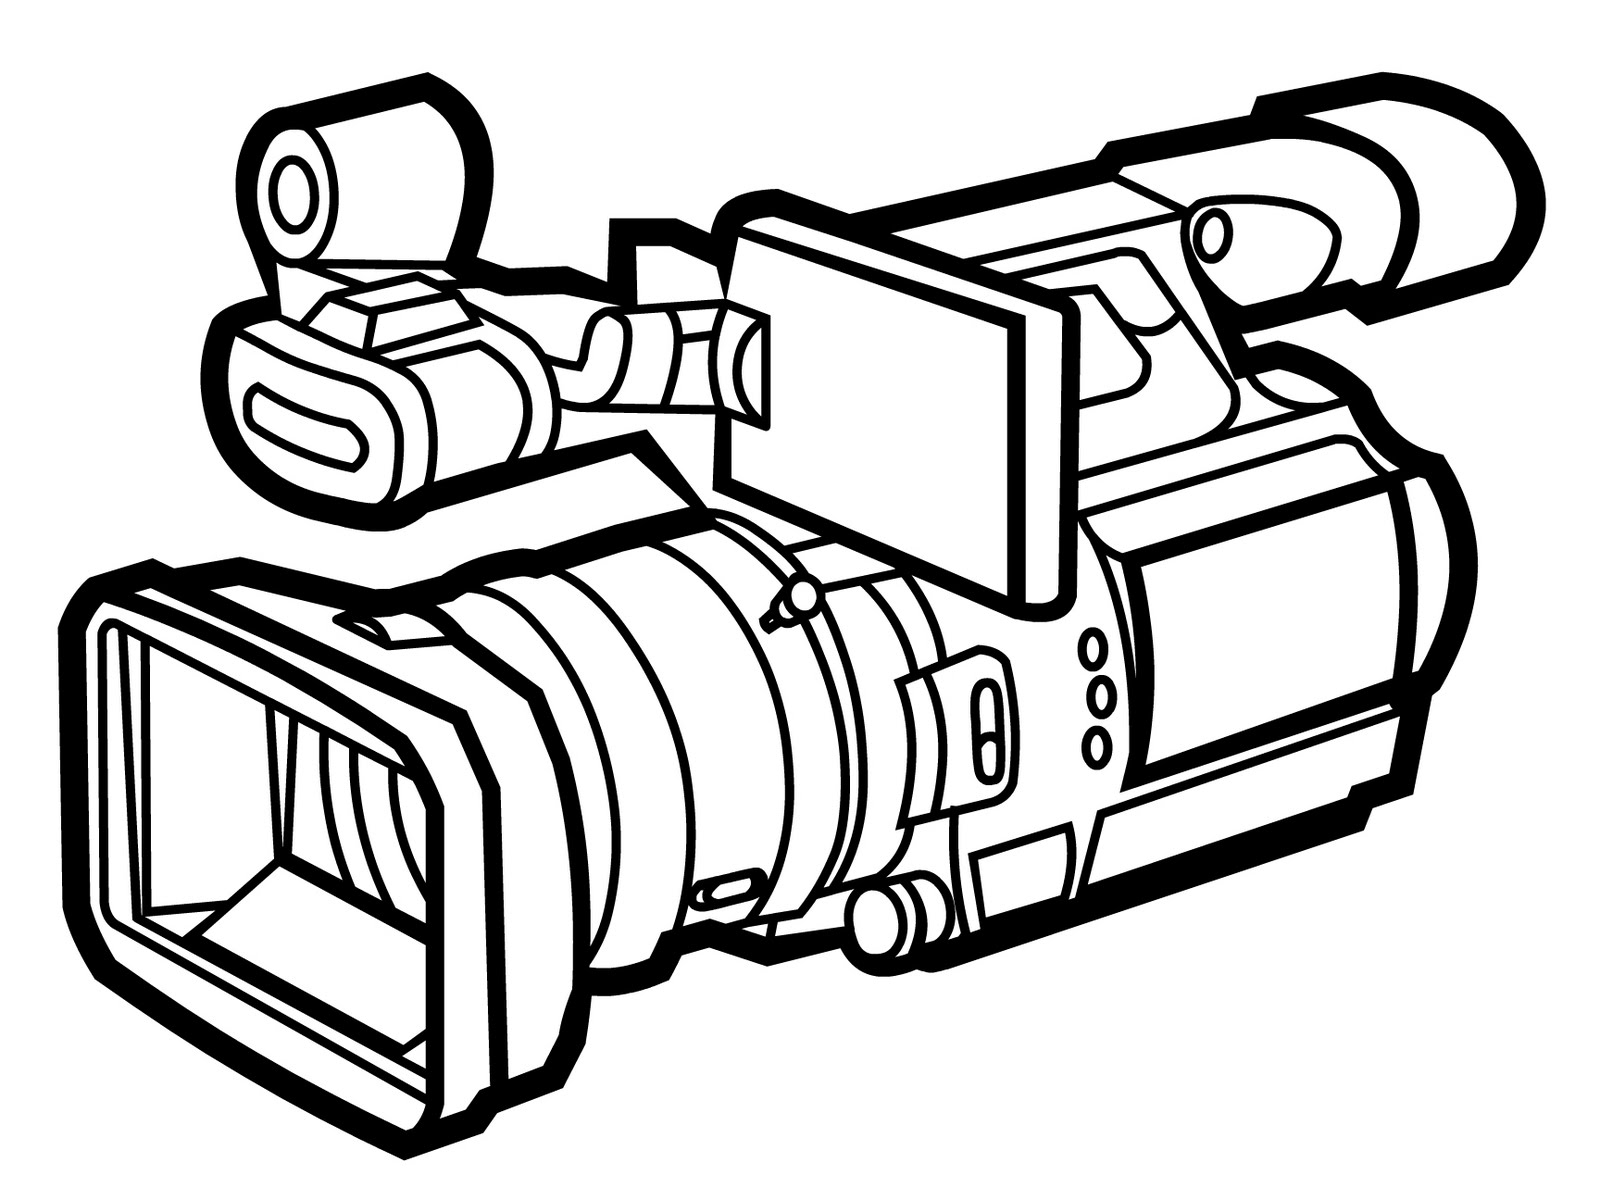 clipart of a video camera - photo #33